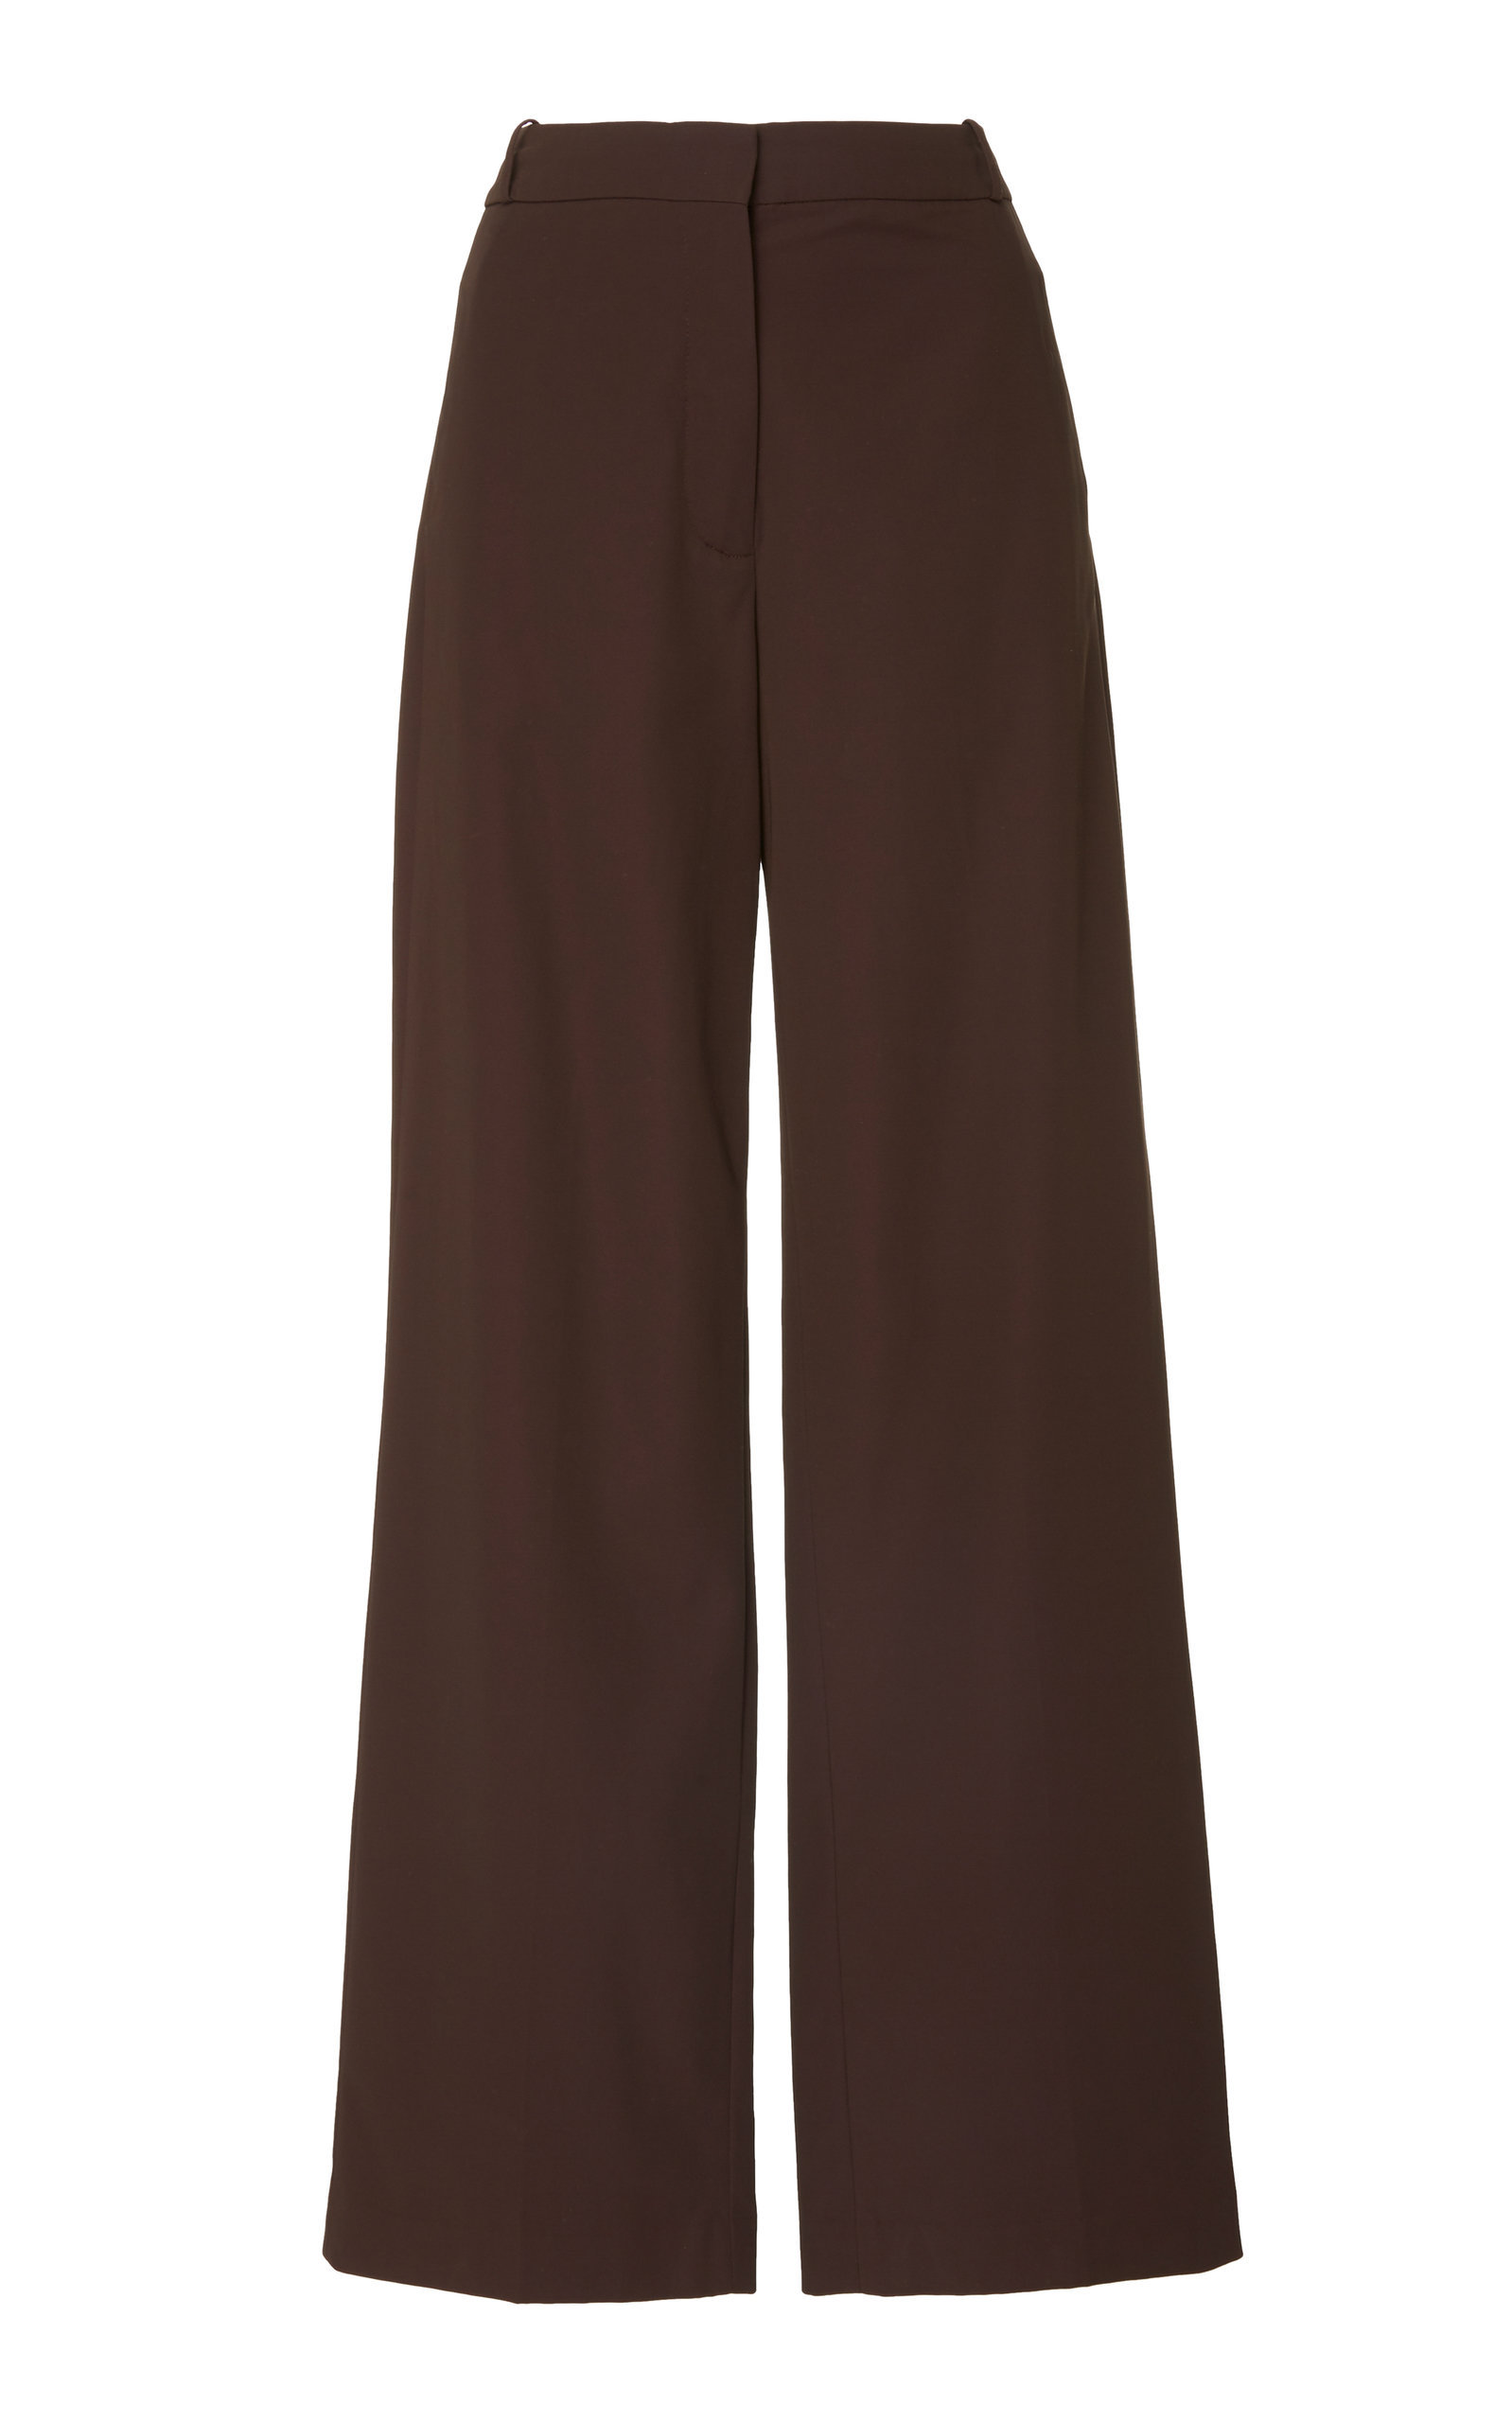 Classic Comfort: Stay Chic in Brown Trousers